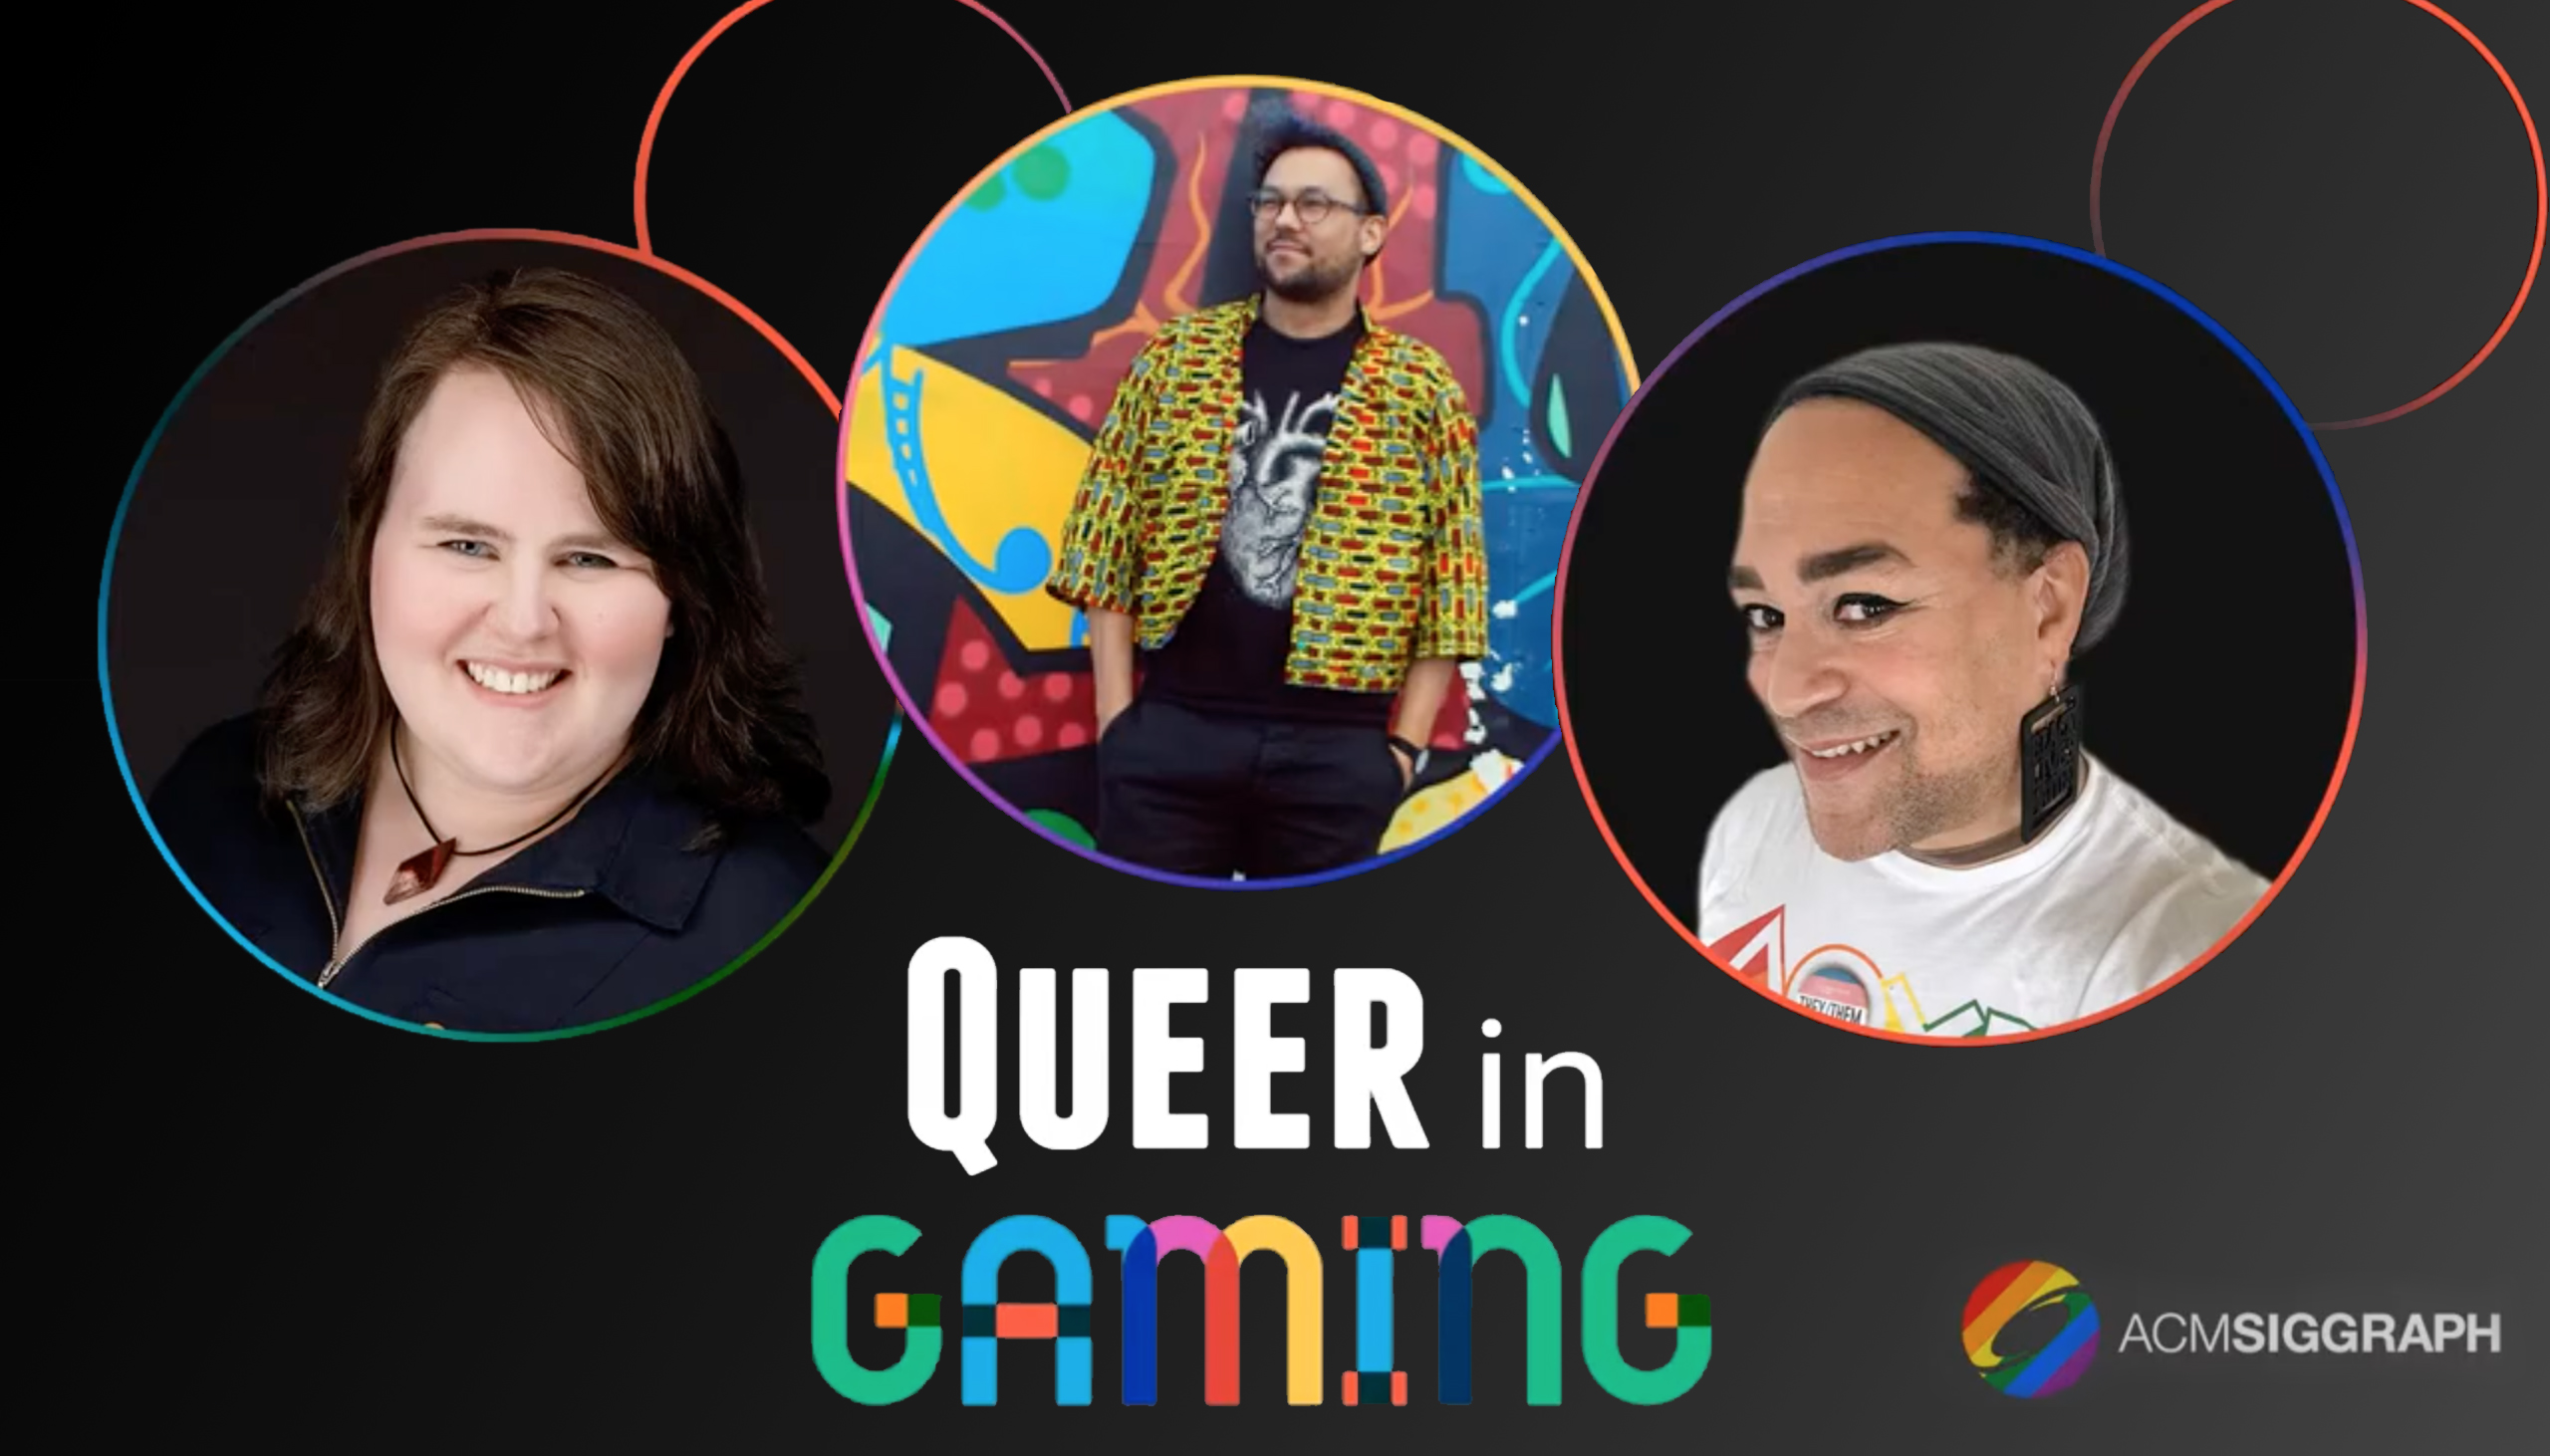 Celebrate Pride Month With the ACM SIGGRAPH Diversity, Equity and Inclusion Committee’s ‘Queer in Gaming’ Series